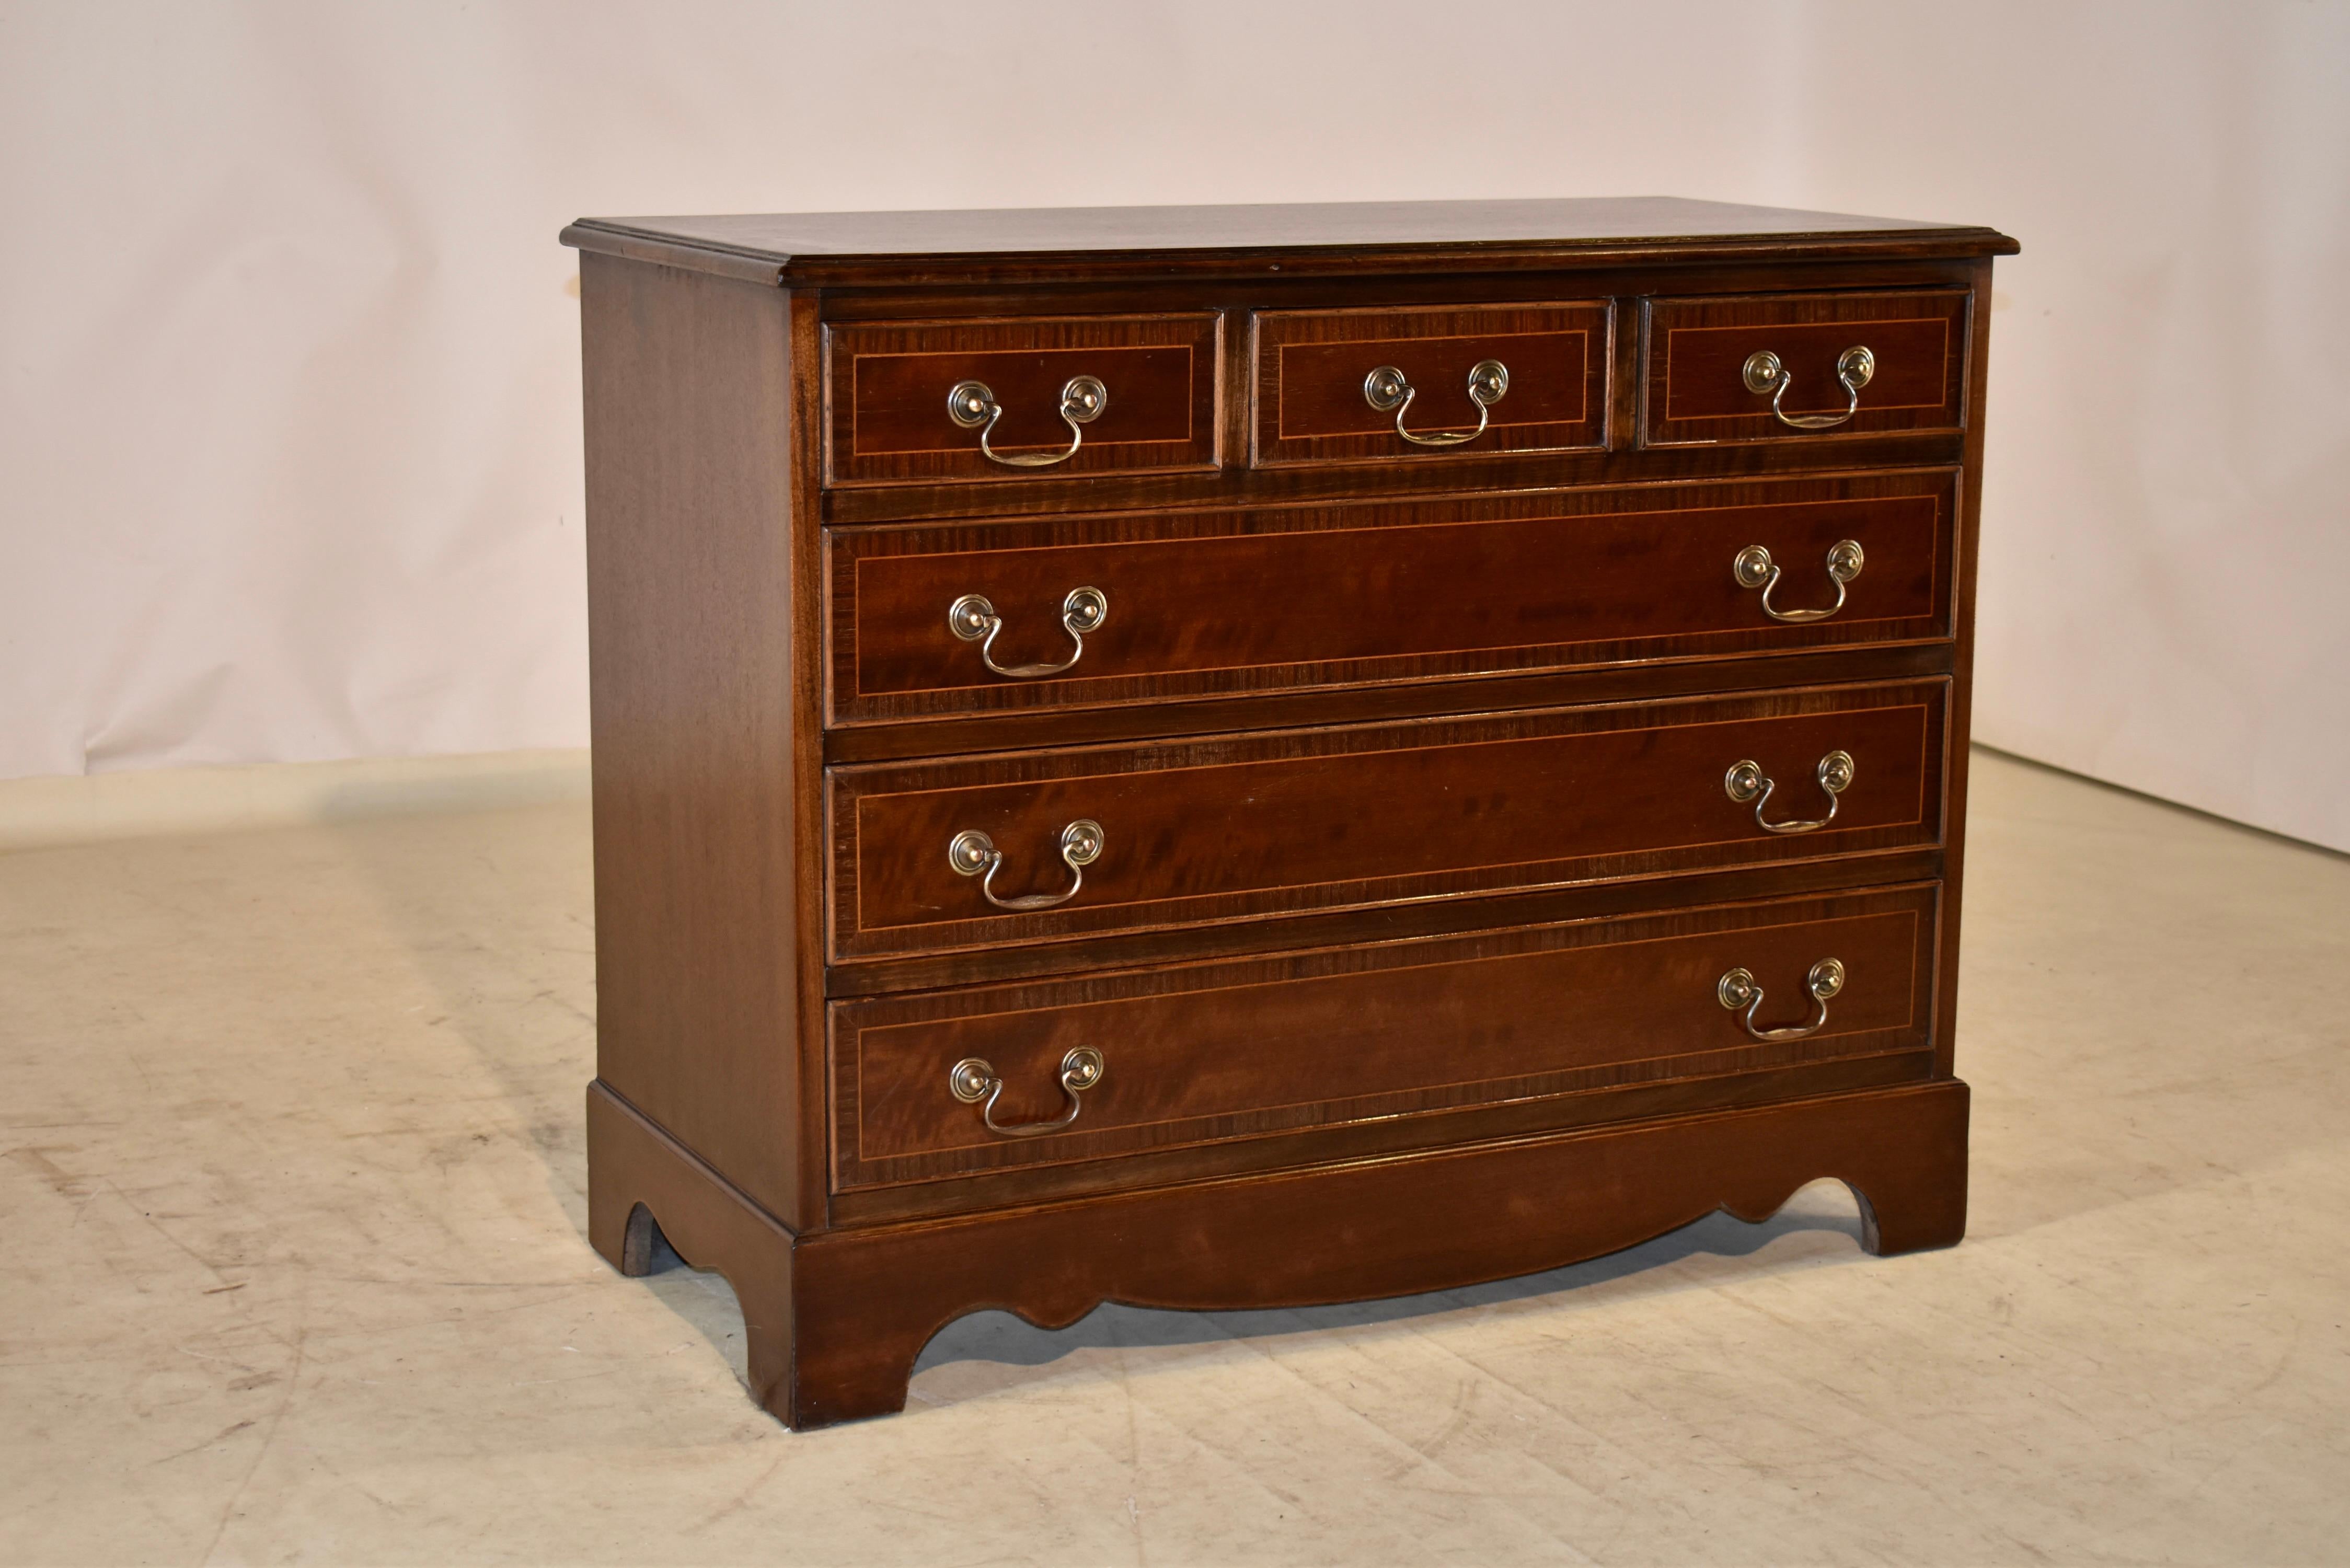 Circa 1950 mahogany chest of drawers from England. The case is veneered in plum pudding mahogany, which gives this chest a stunning profile from any angle in a room. The top is banded in mahogany and satinwood, and has a beveled edge. The sides are